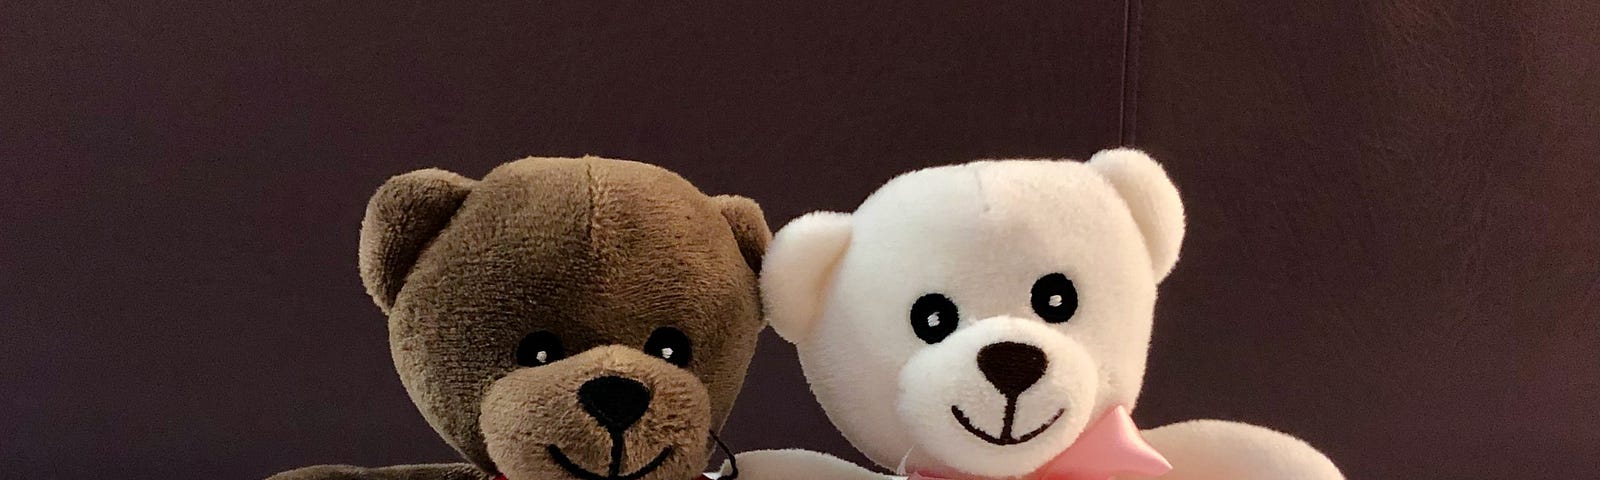 A close-up of two small bears in bed.